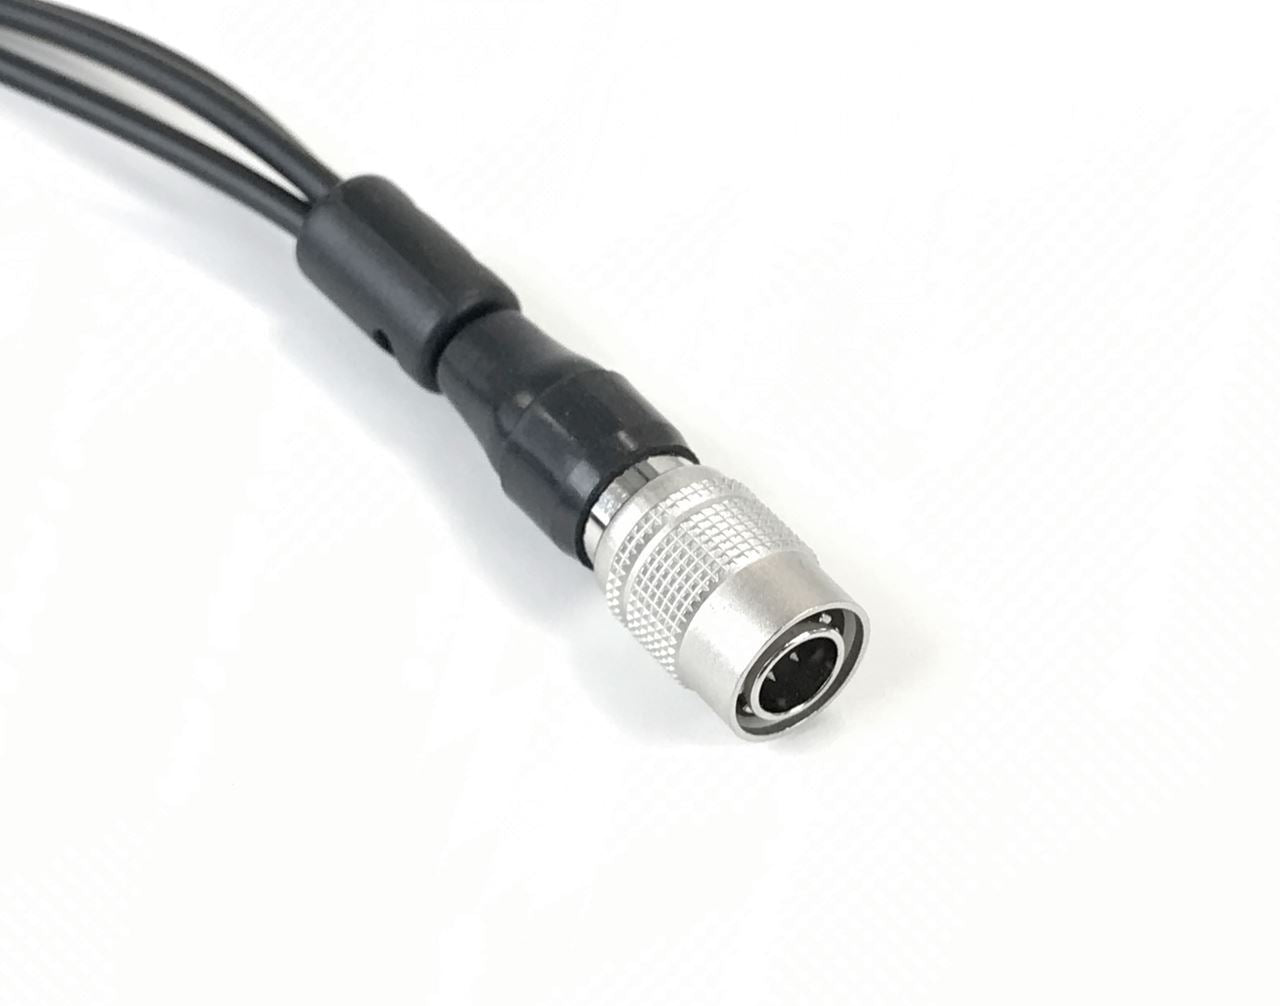 Comparable KHS-12 3 wire mini lapel mic with earphone for use with the Kenwood NX-5410 Portable Radio - Waveband Communications